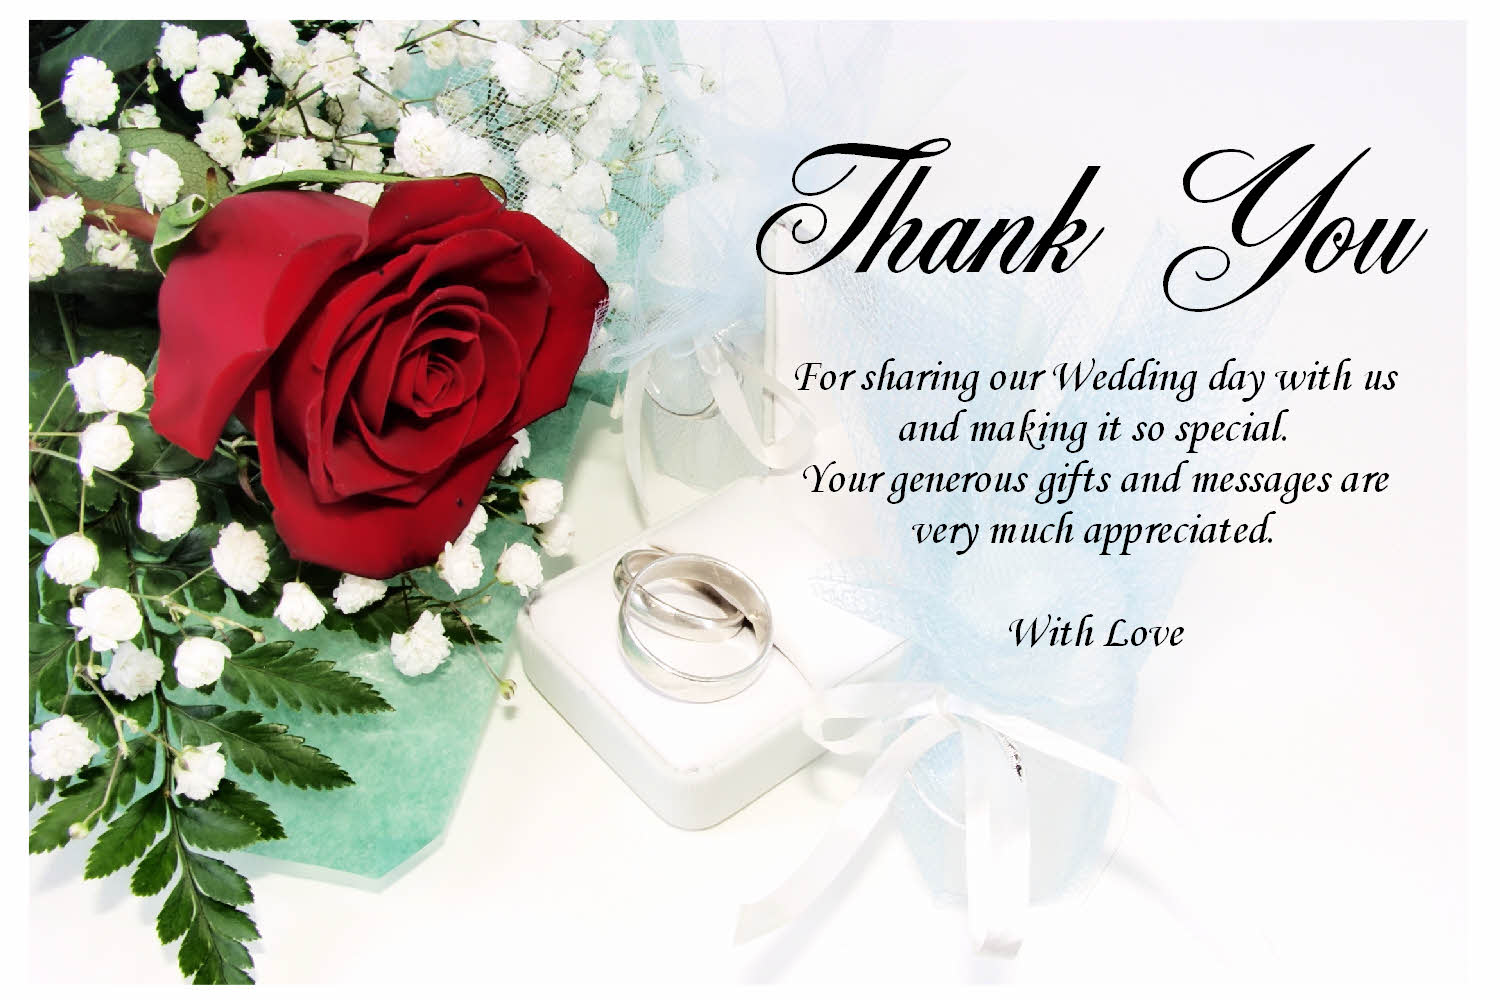 Thank You my love quotes free hd wallpapers | Wallpapers Wide Free